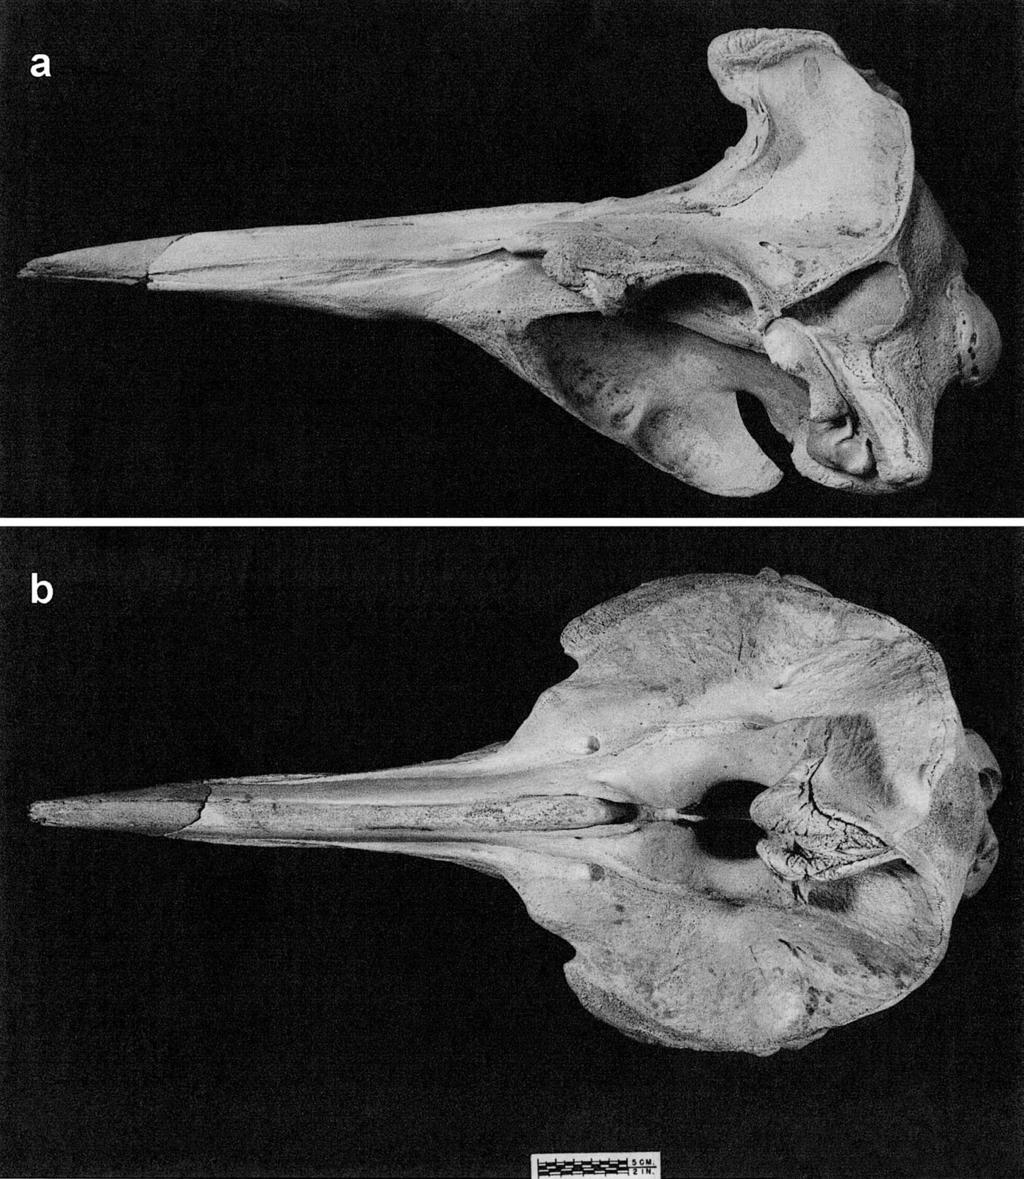 DALEBOUT ET AL.: NEW SPECIES OF BEAKED WHALE 597 Figure 6. Skull photographs, USNM504853, holotype: (a) lateral view, (b) dorsal view.